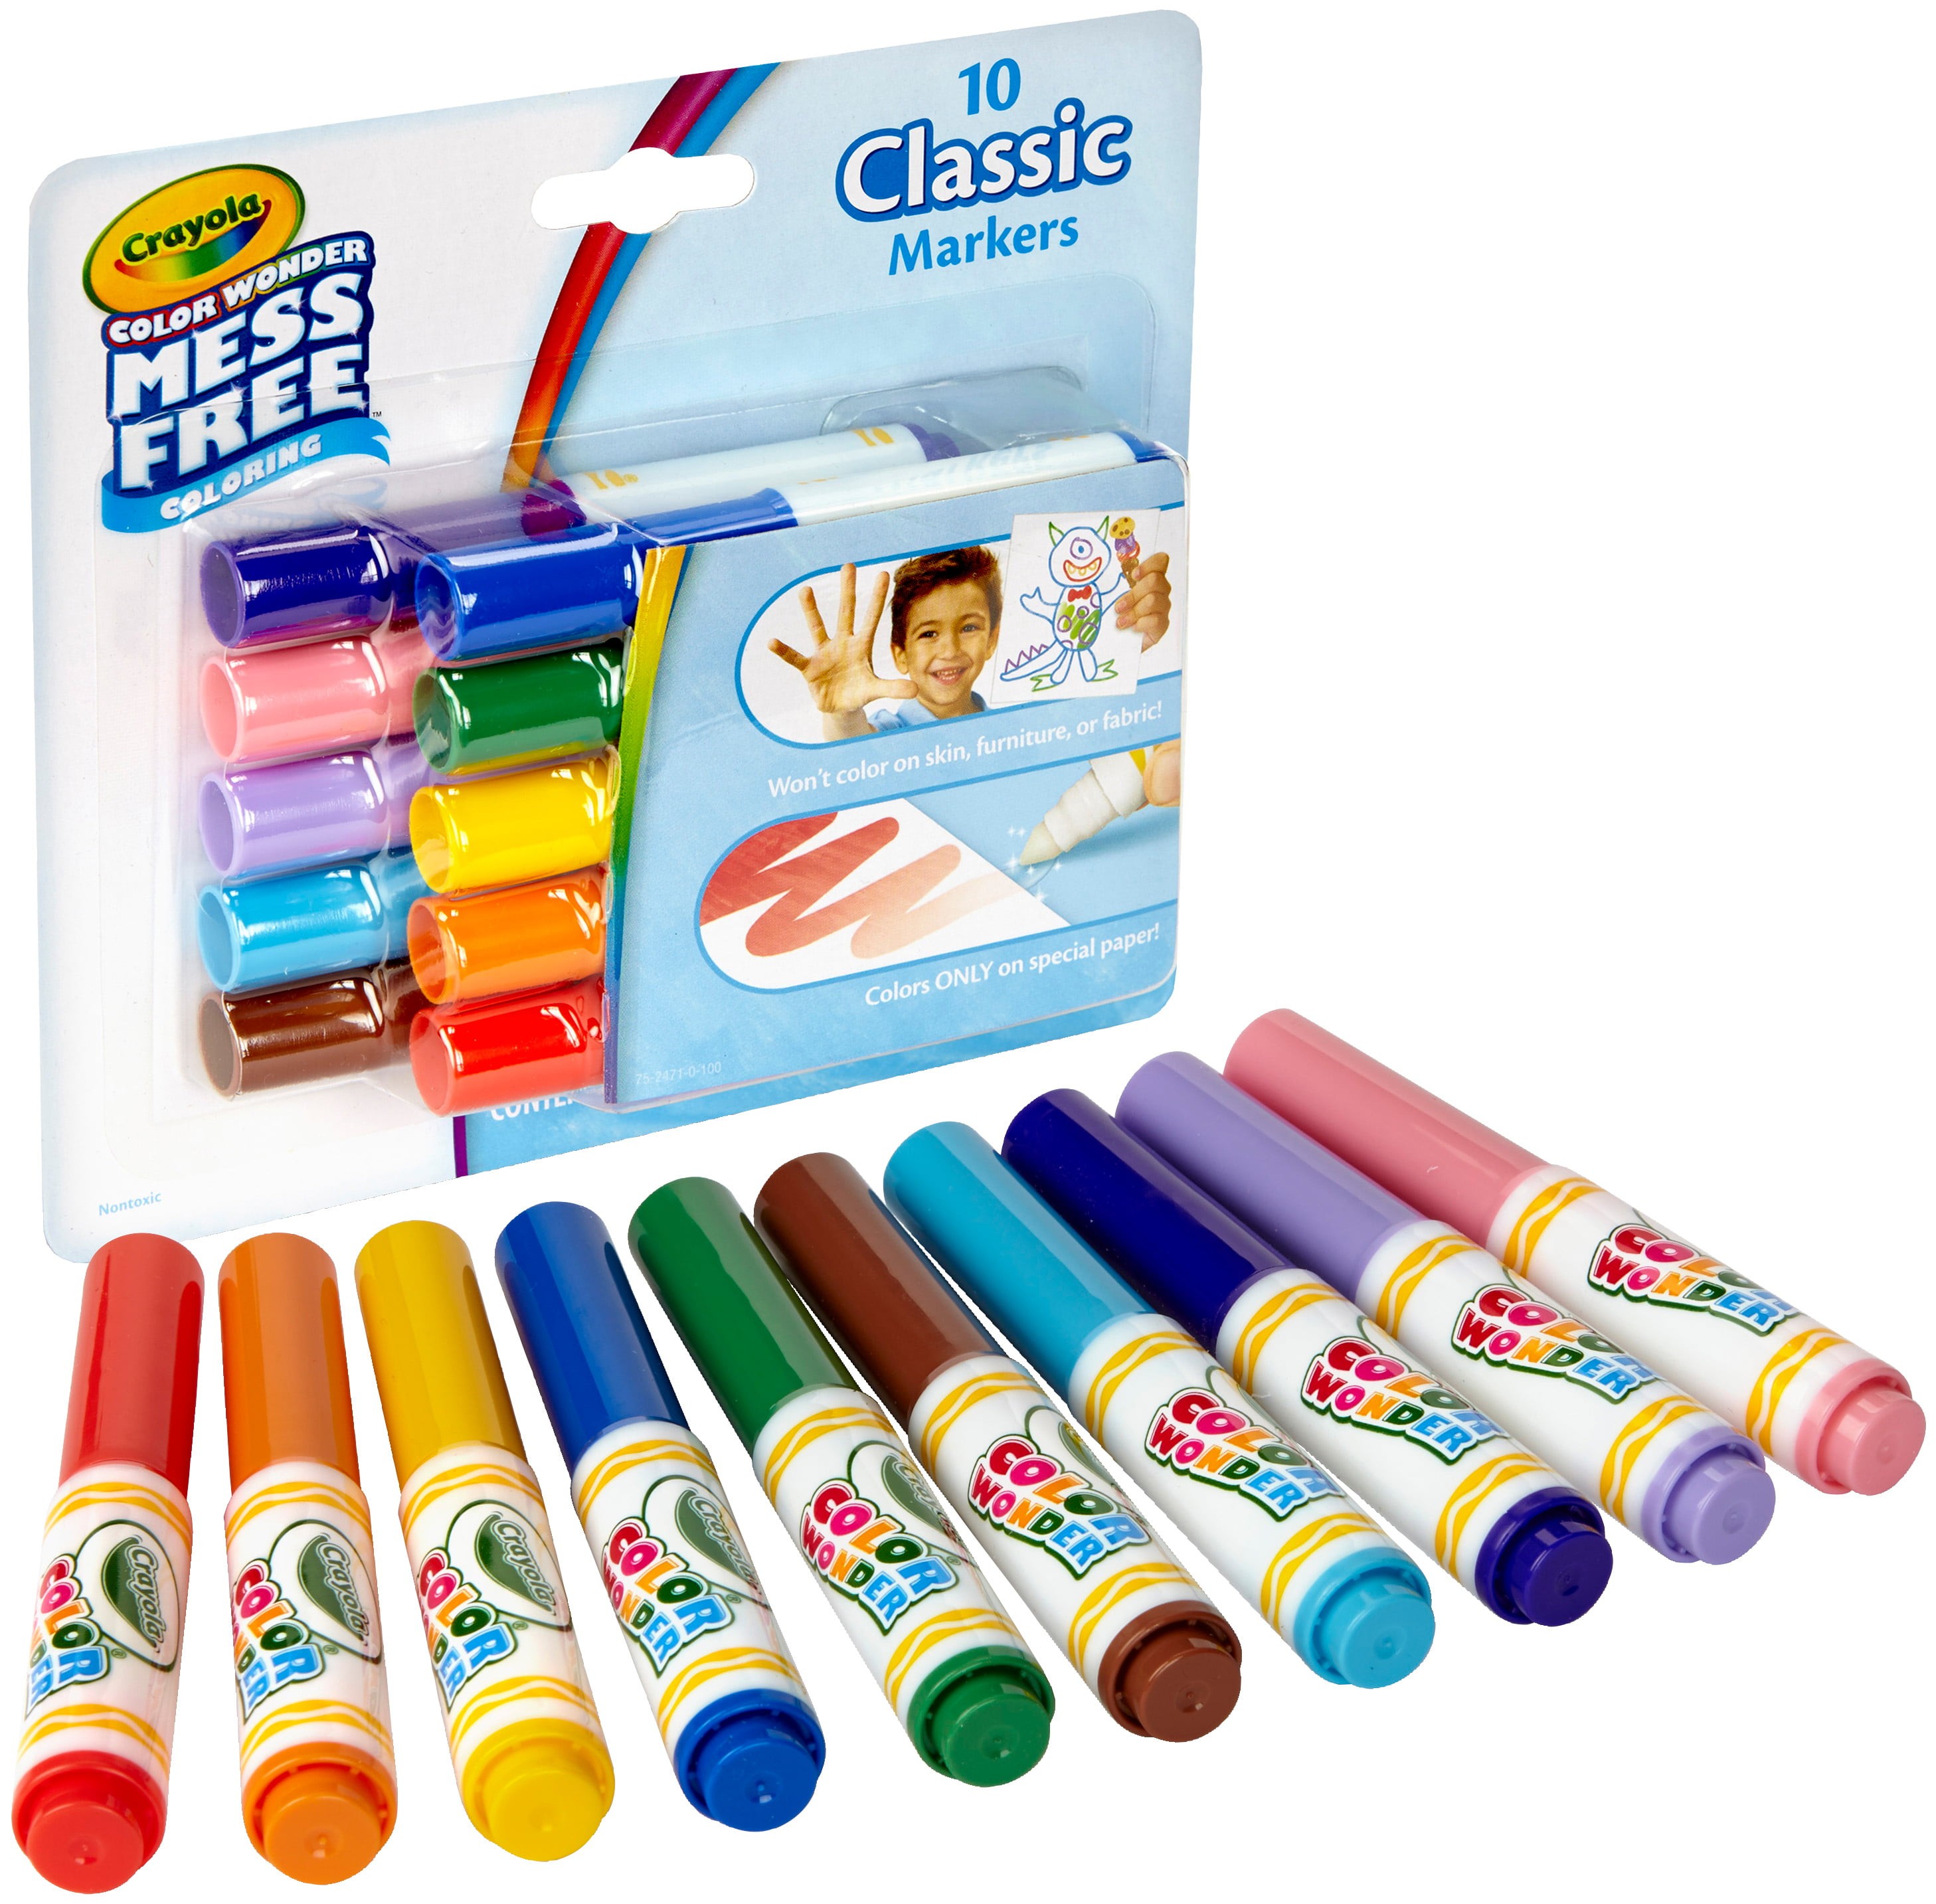 Crayola Modeling Clay .6oz 8 Count, Multipack of 12-, Multicolor